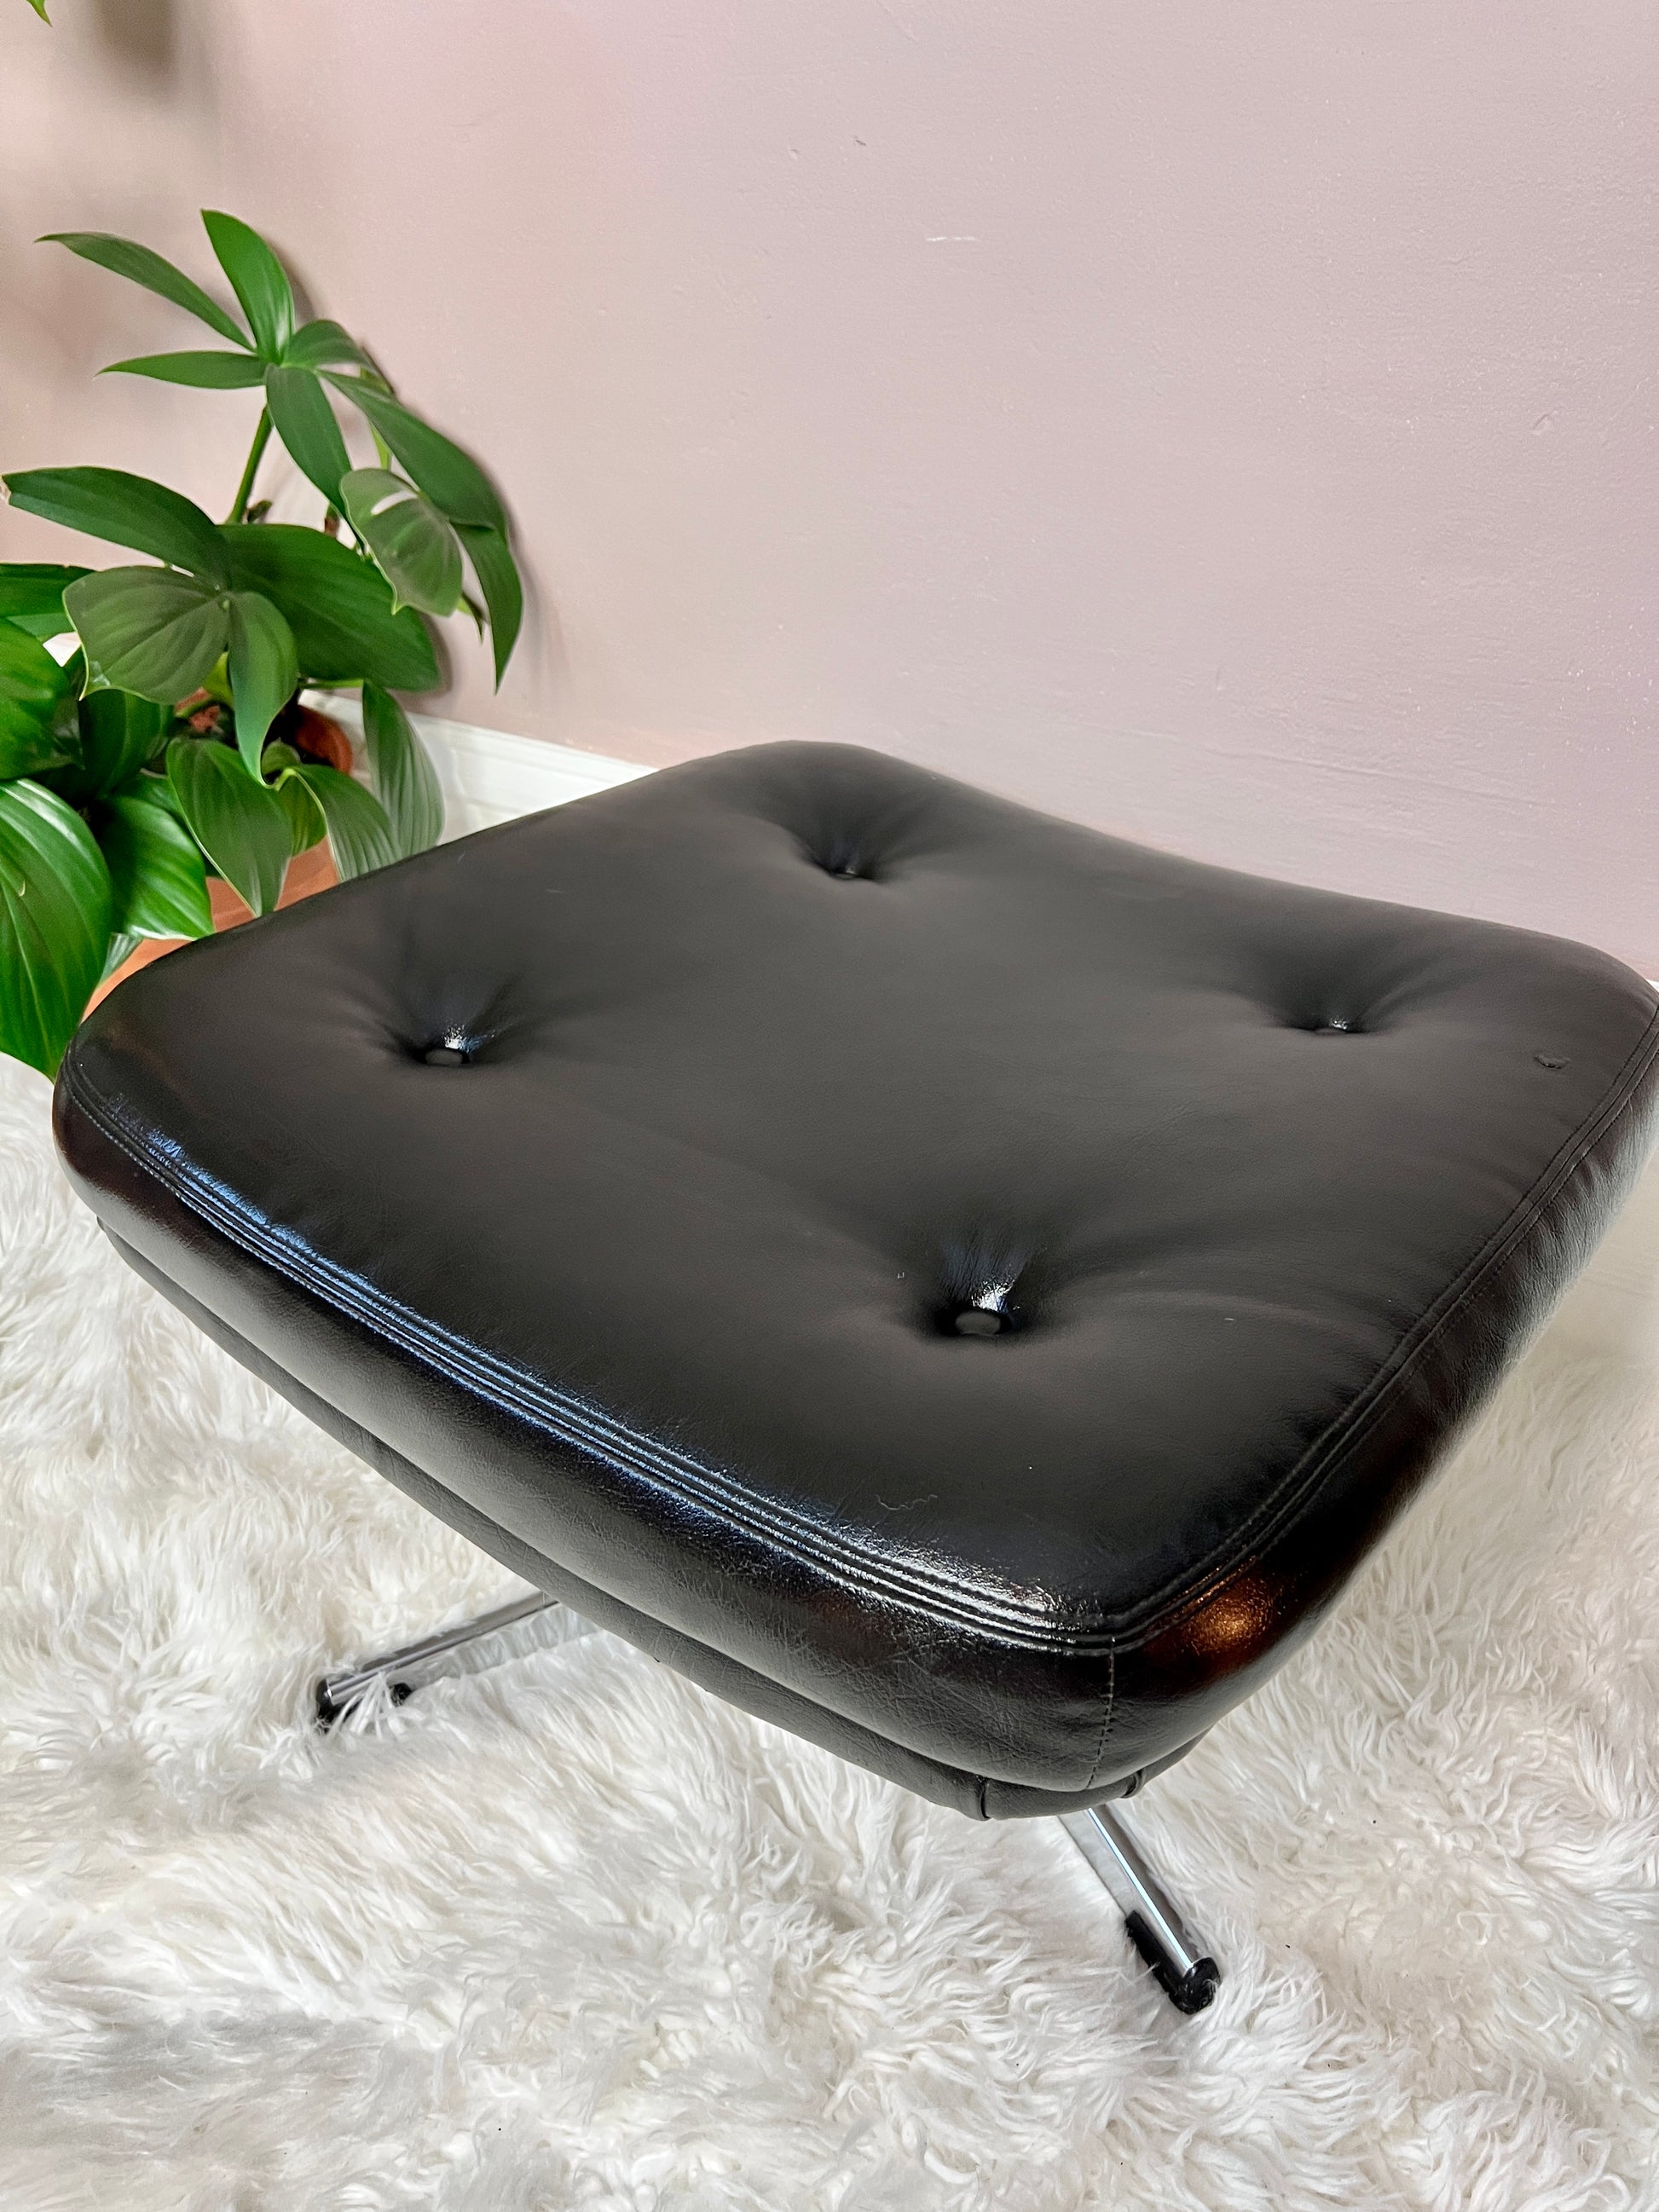 This is a black vinyl & chrome eames style ottoman footstool